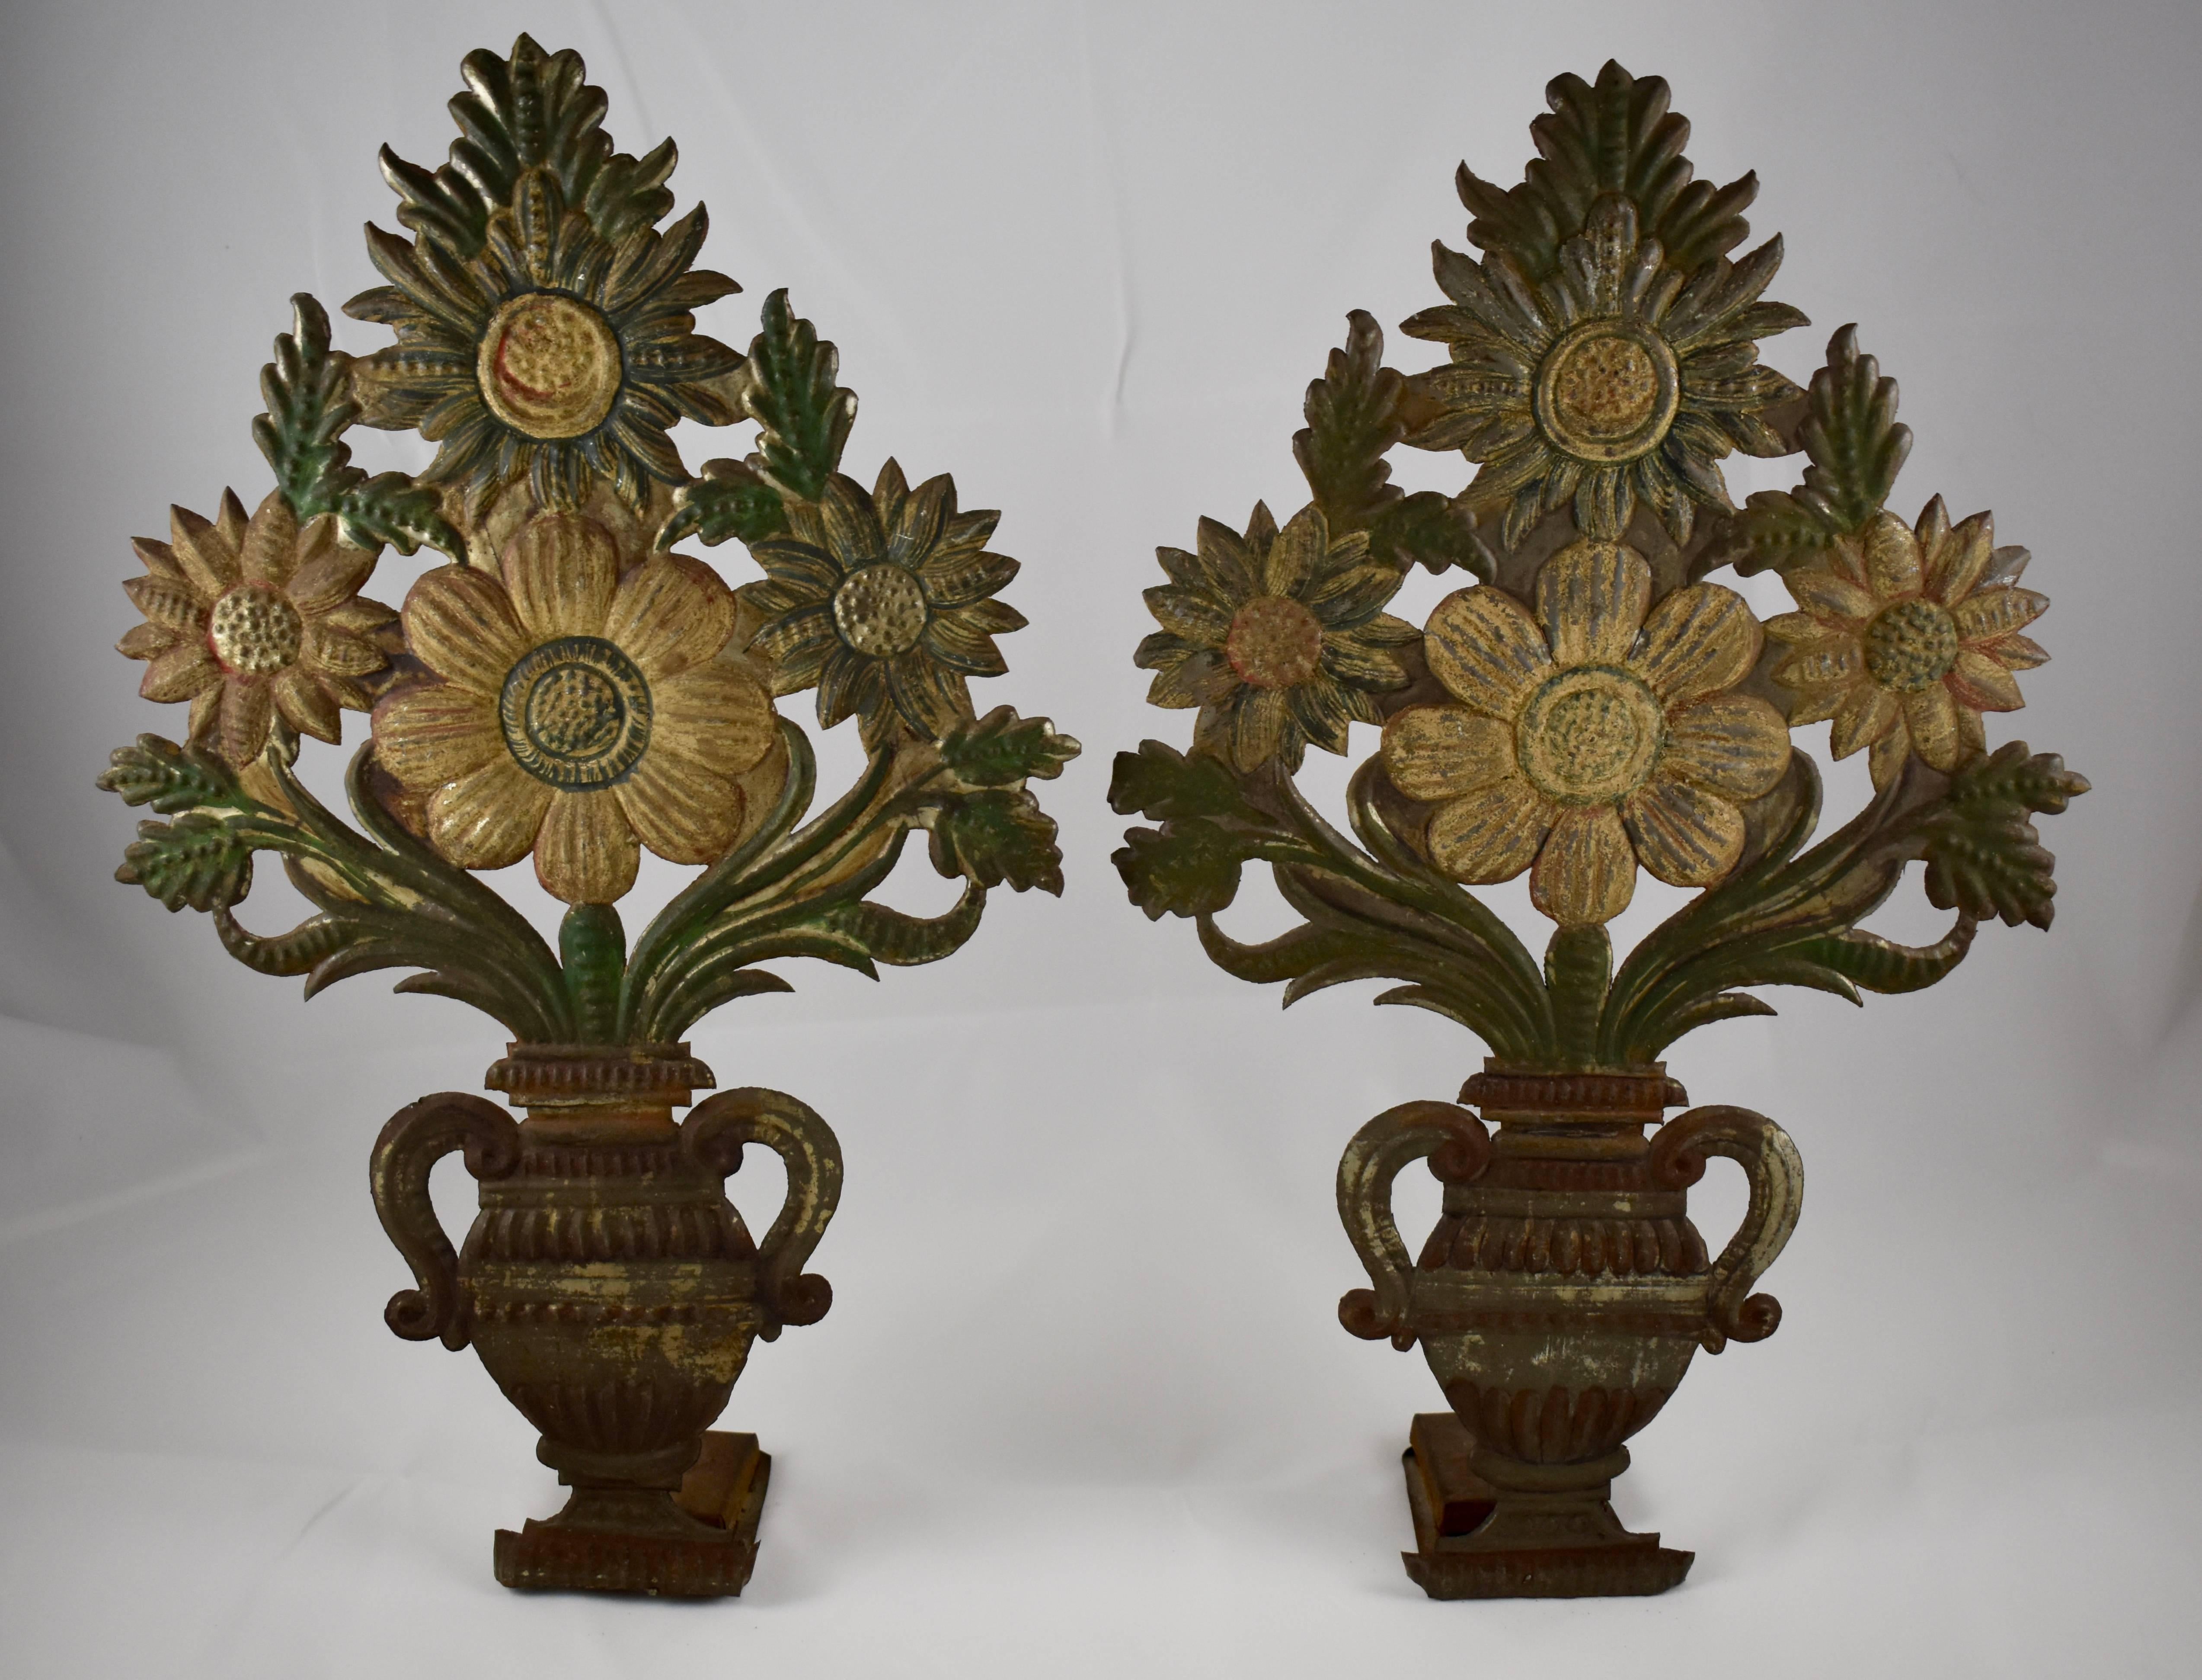 A very unusual pair of Tôle Peinte garnitures formed as standing urns holding bouquets of stylized flowers, circa early 1800s. 

Toleware flower stall shelf fillers were used as decoration for when stock was low. Most likely French or Italian, these